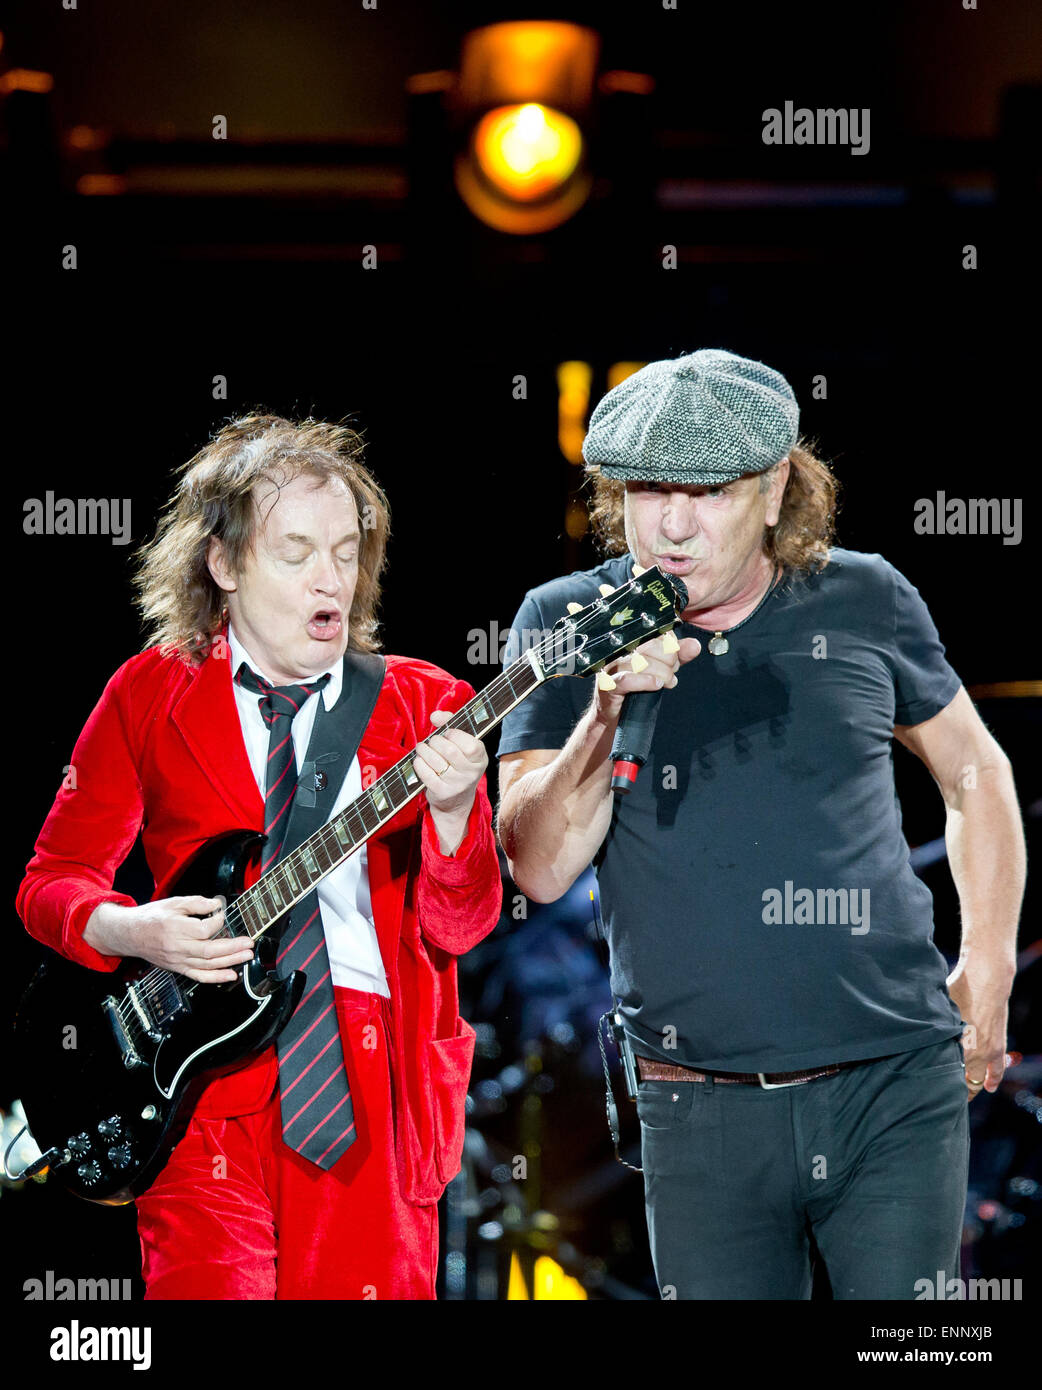 Nuremberg, Germany. 8th May, 2015. Singer of the Australian rock band AC/DC, Brian Johnson (l), and guitarist Angus Young on stage at the start of their German tour in Nuremberg, Germany, 8 May 2015. Photo: Daniel Karmann/dpa/Alamy Live News Stock Photo